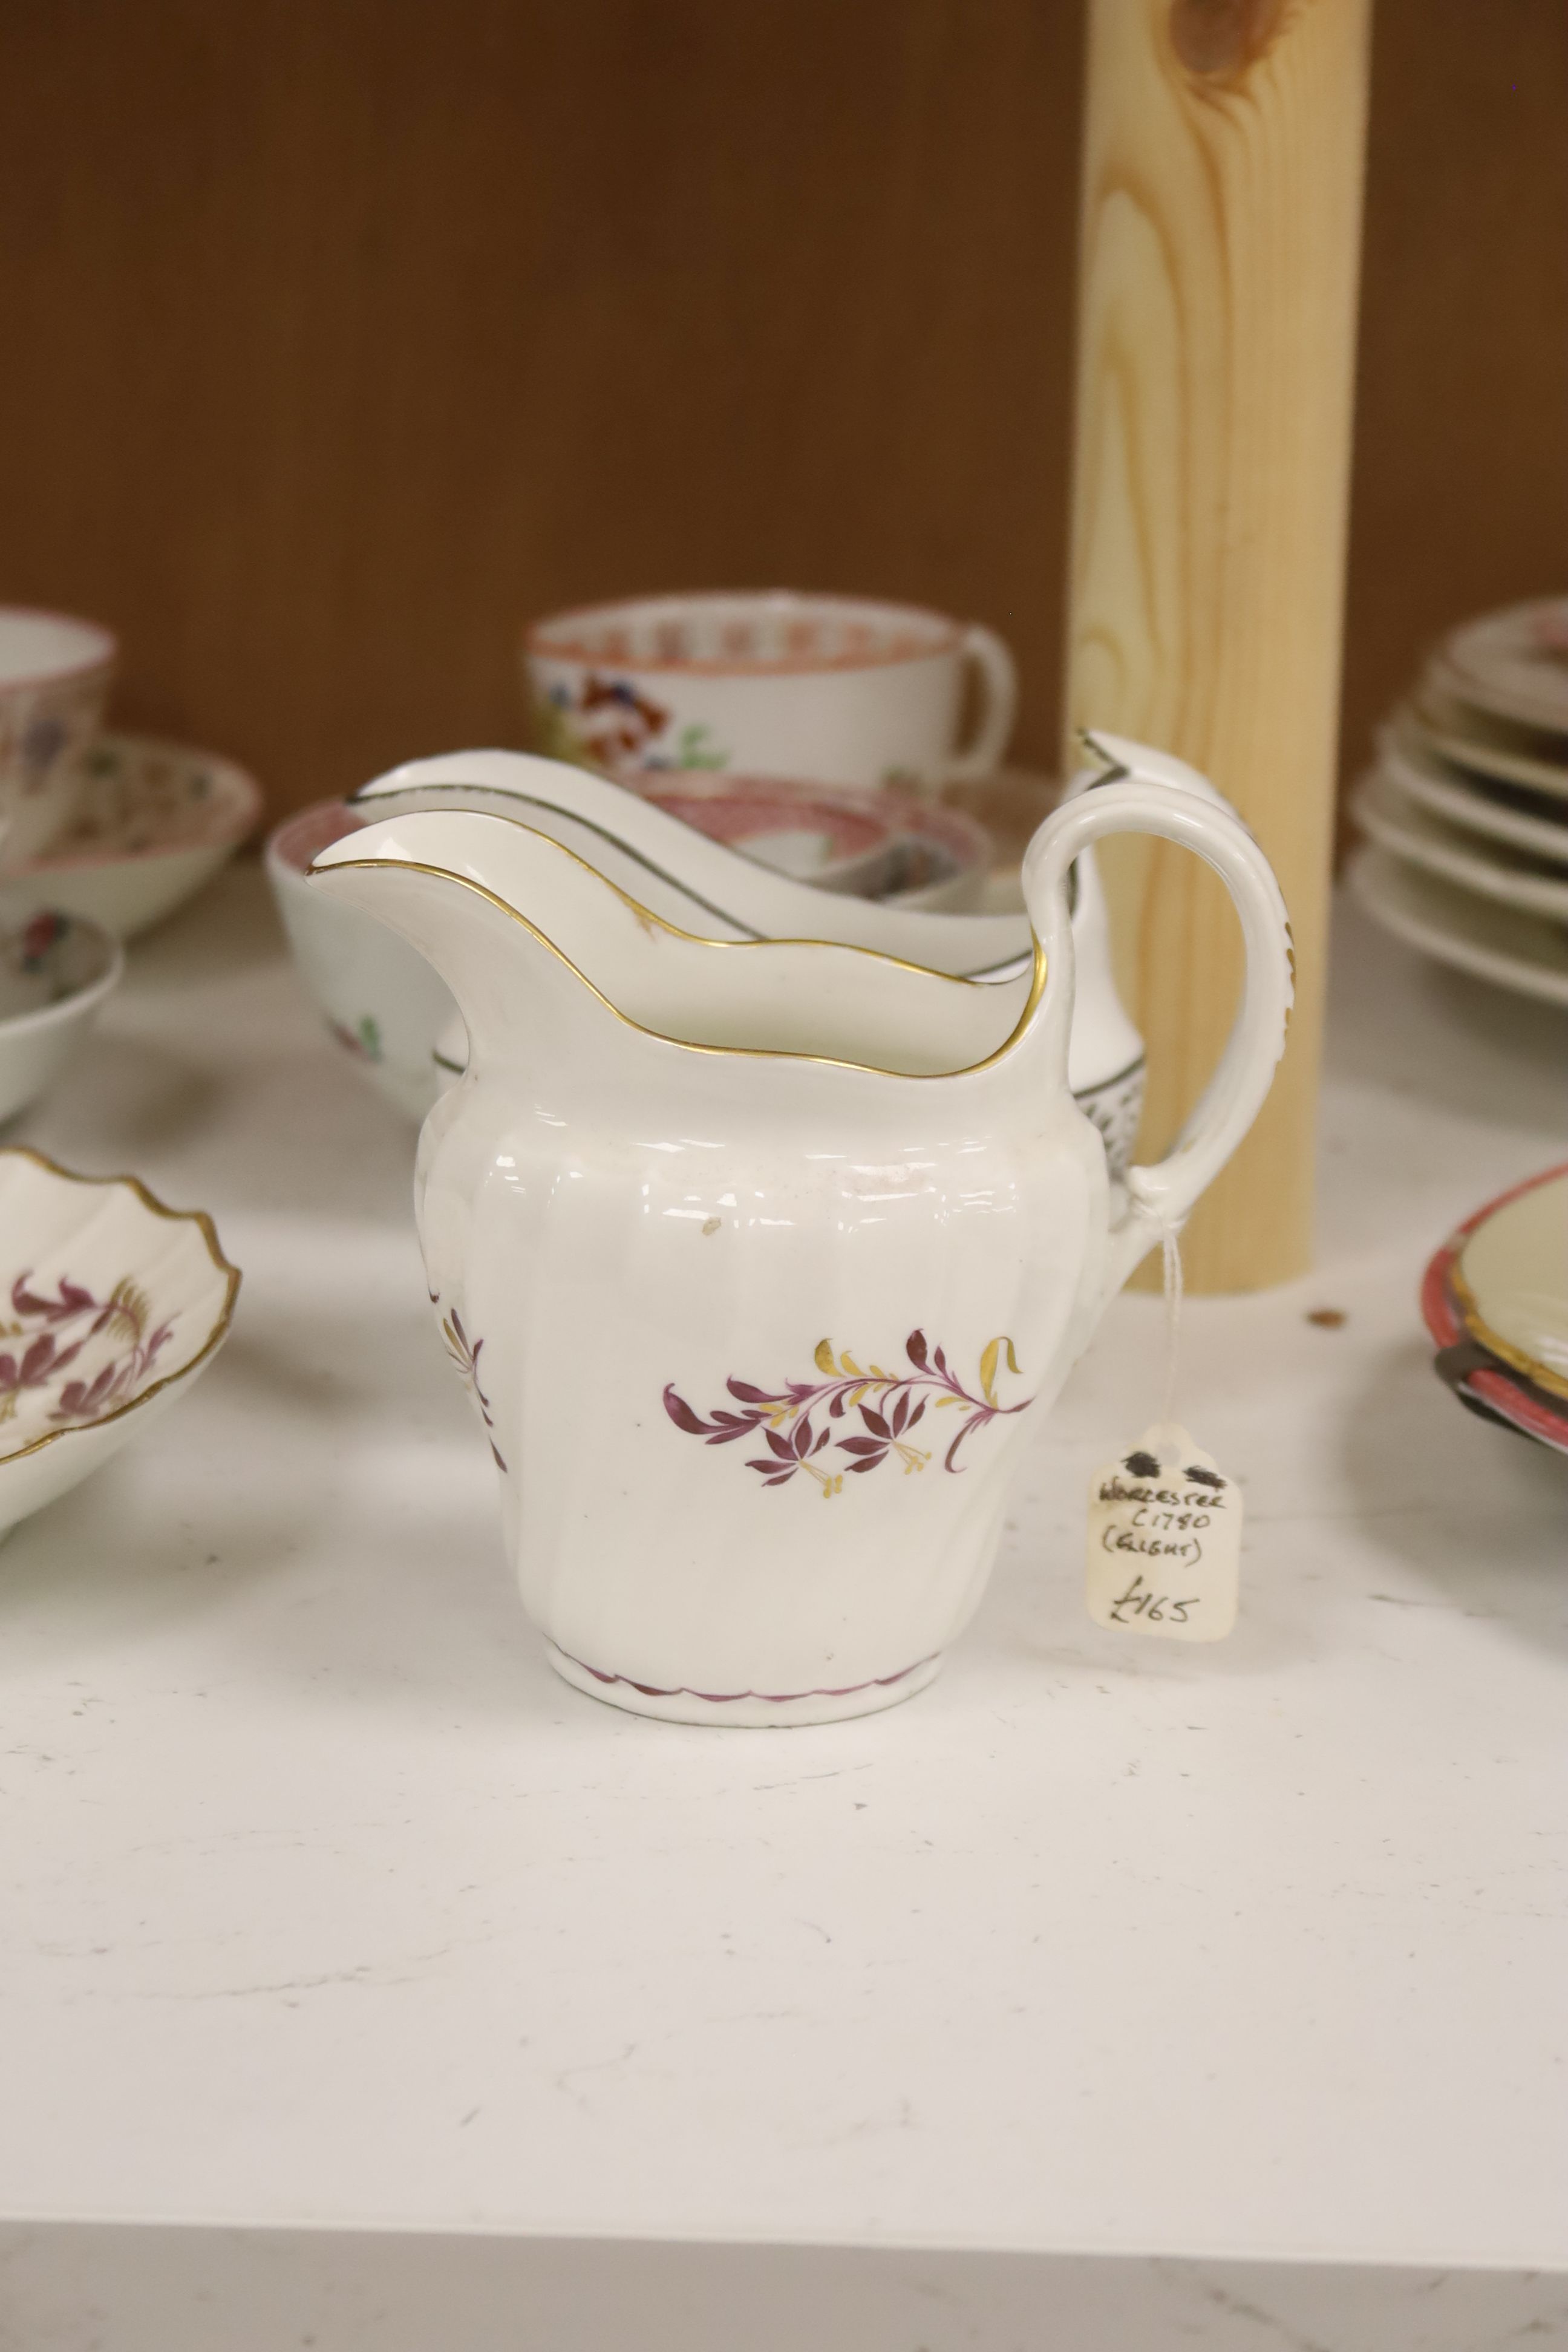 A group of late 18th / early 19th century English porcelain teaware and plates